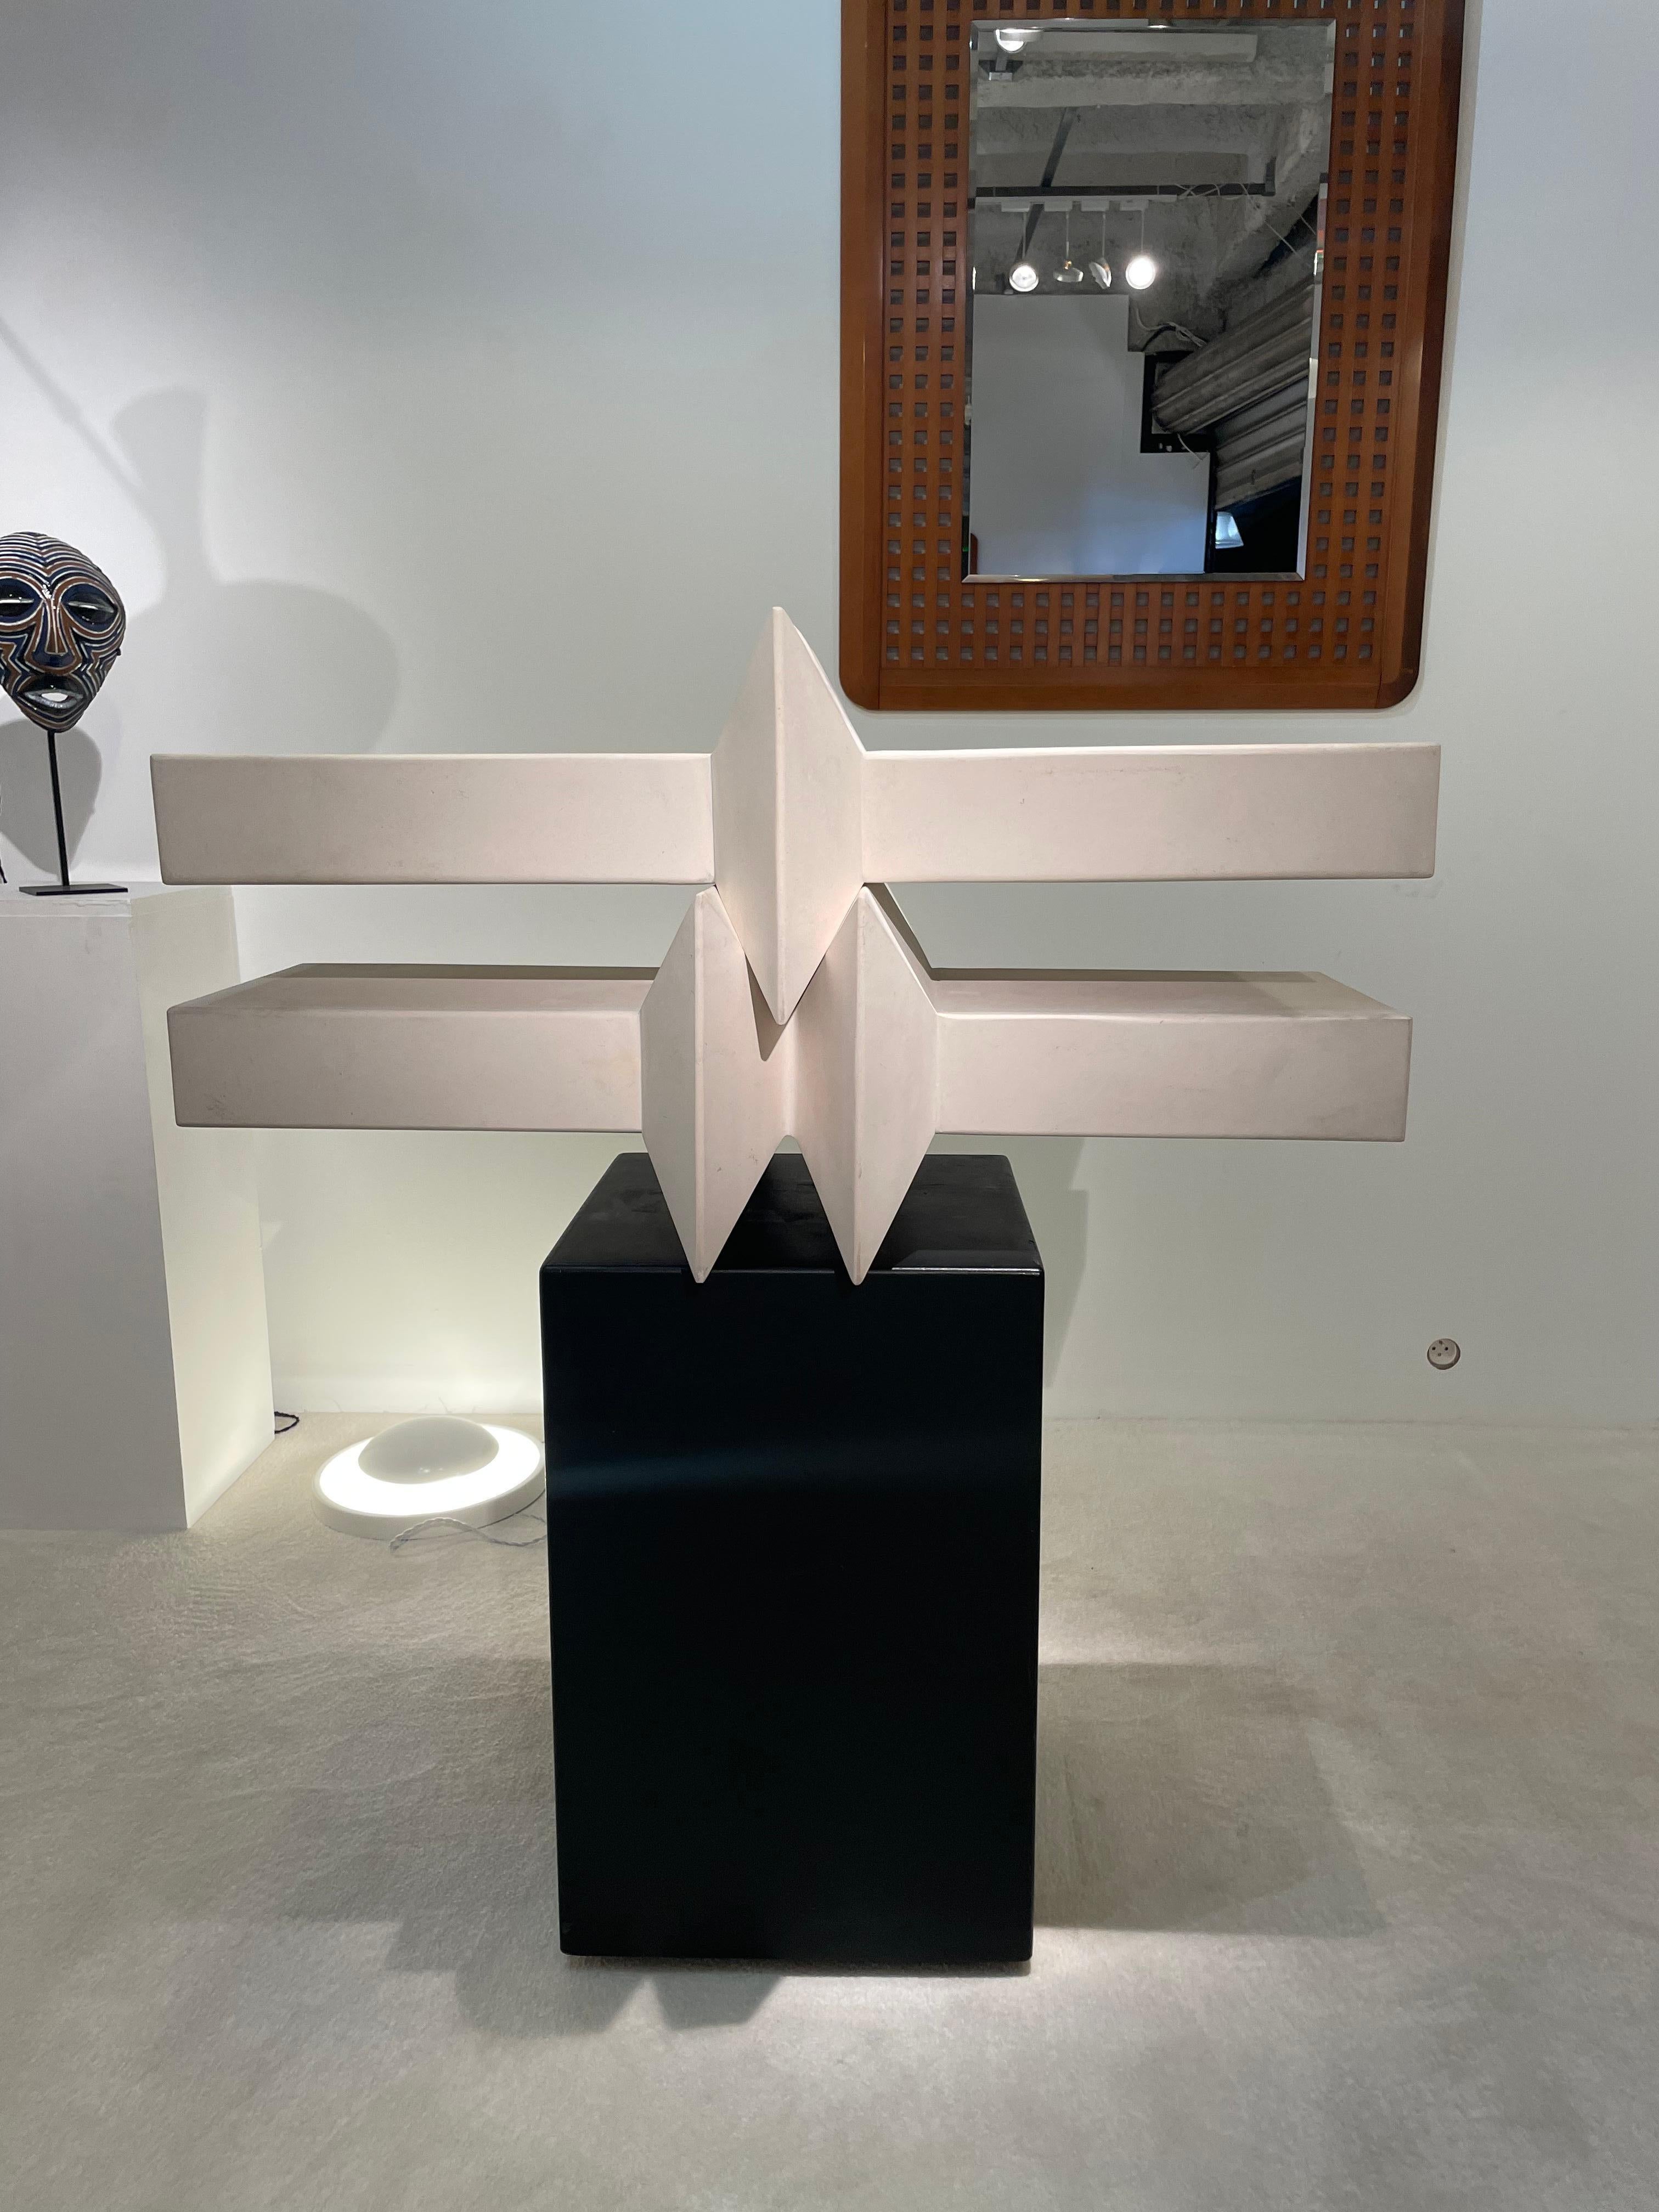 The Belgian Renaat Ramon is a true multi-talent. His oeuvre includes sculptures, paintings and graphics as well as installations and futuristic furniture design, texts and poems. The basic IDEA of ??constructivism and minimalism runs through all his